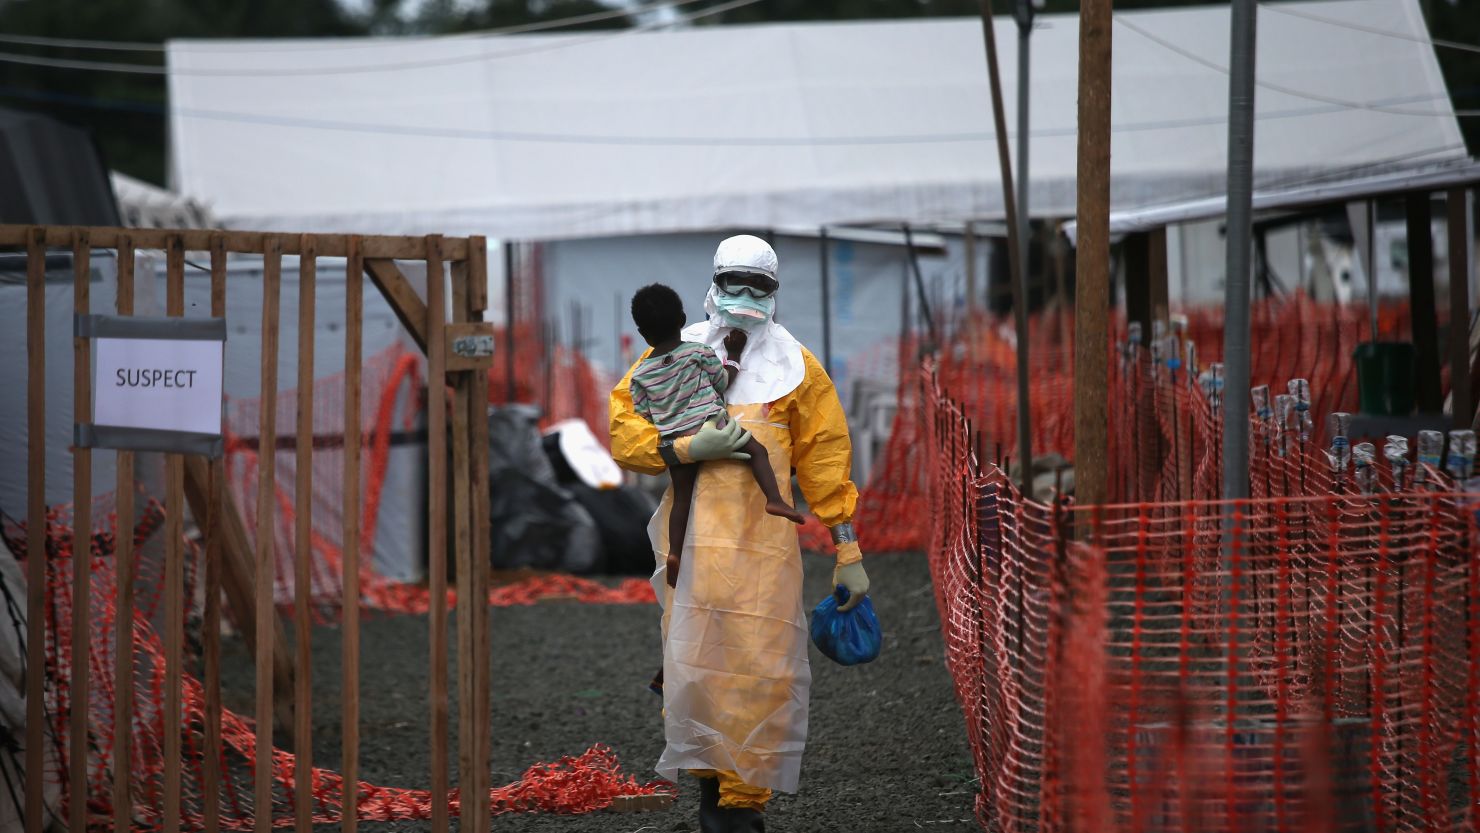 A Doctors Without Borders health worker in protective clothing carries a child suspected of having Ebola in a treatment center in Liberia in October 2014.